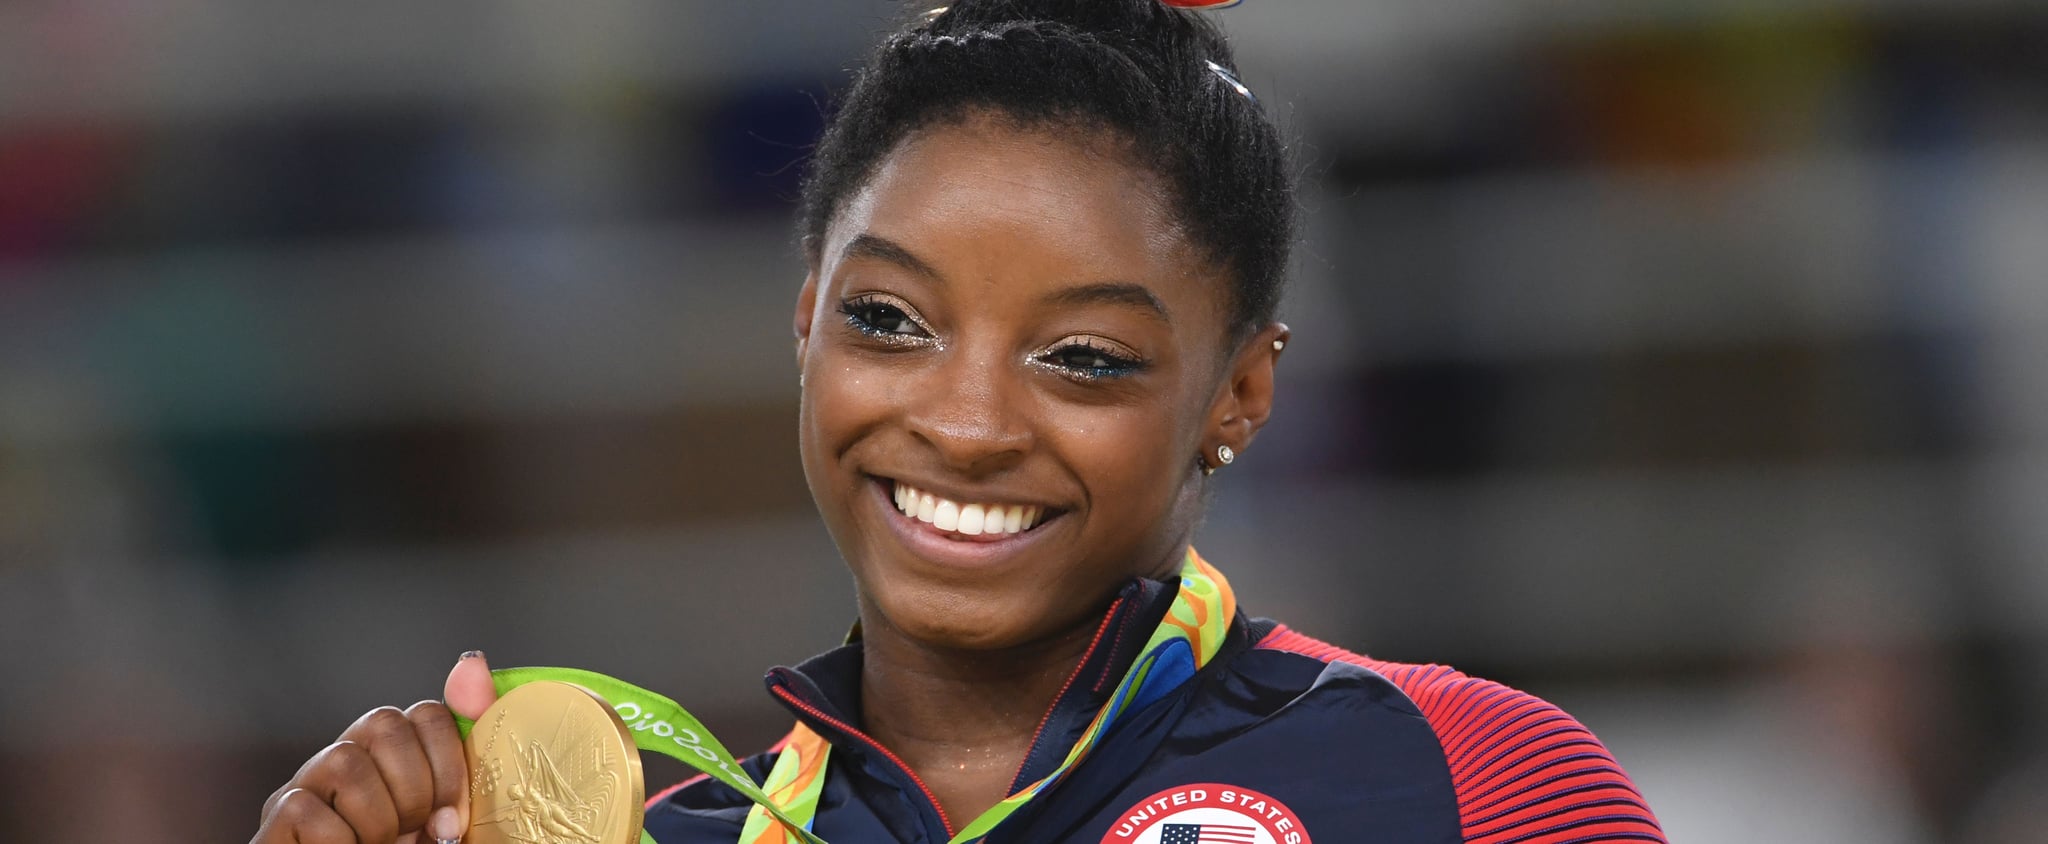 16+ Olympics Gold Medal Simone Biles Images